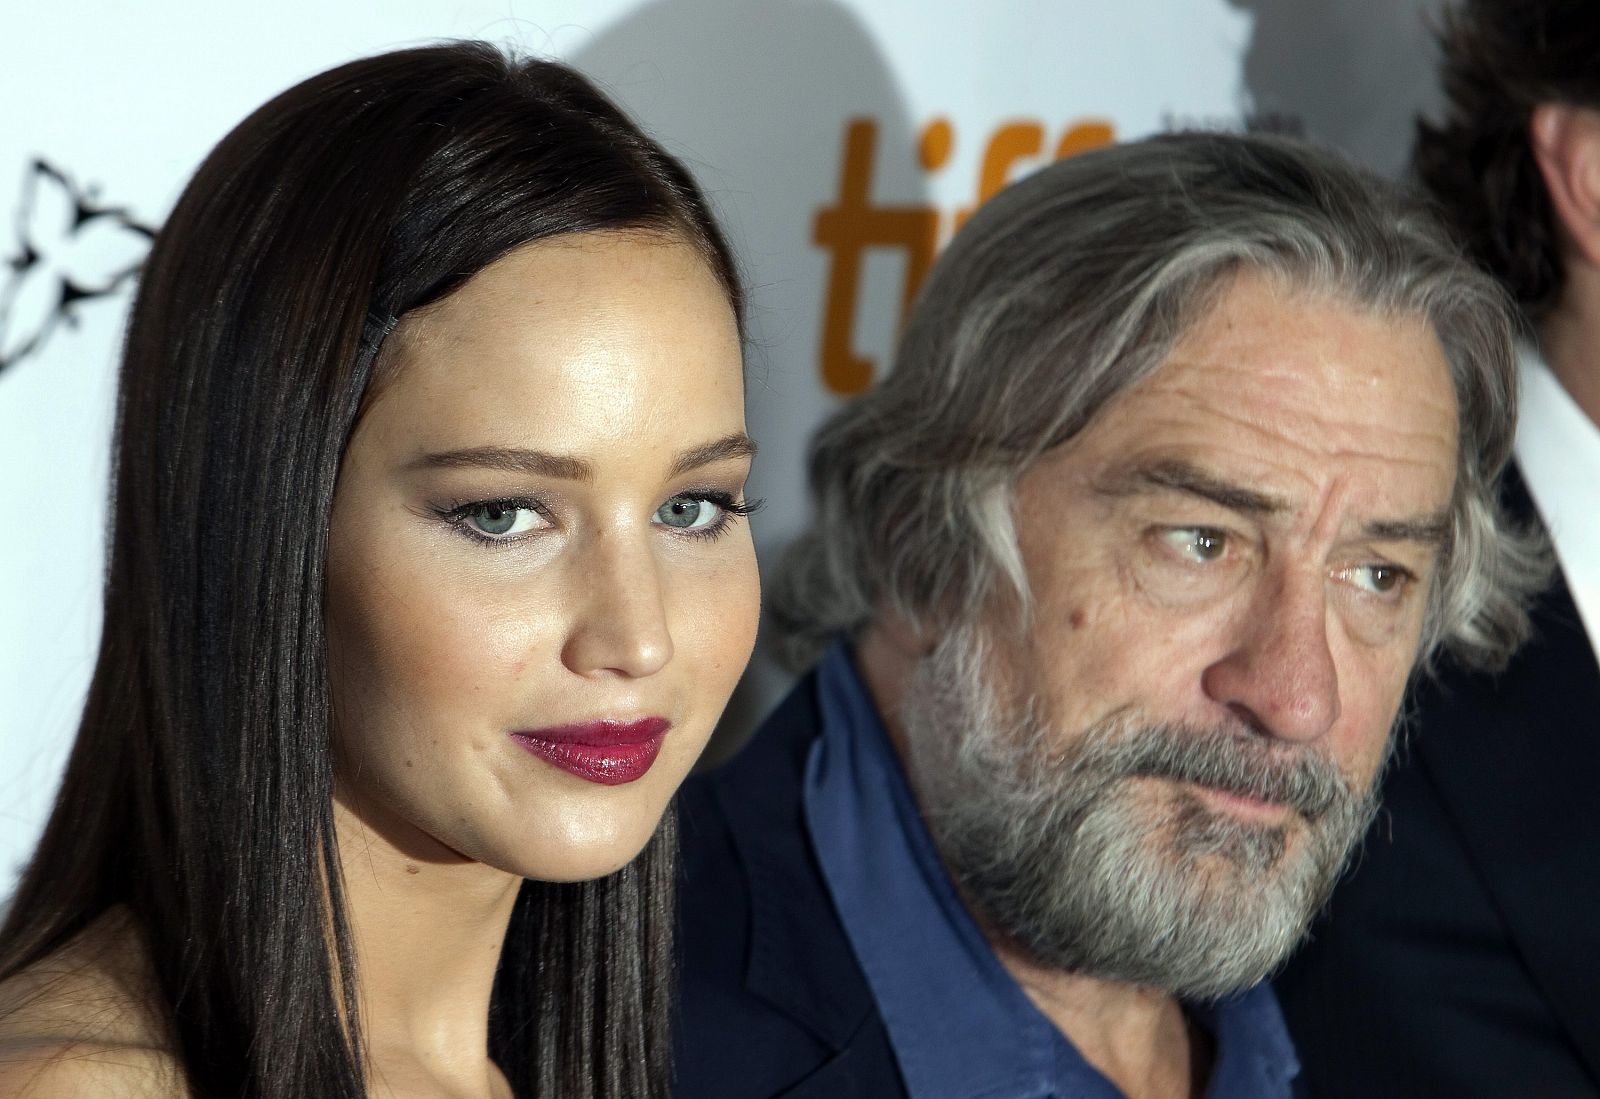 Actors Robert De Niro and Jennifer Lawrence arrives at the gala presentation for the film ' Silver Linings Playbook' during the 37th Toronto International Film Festival.